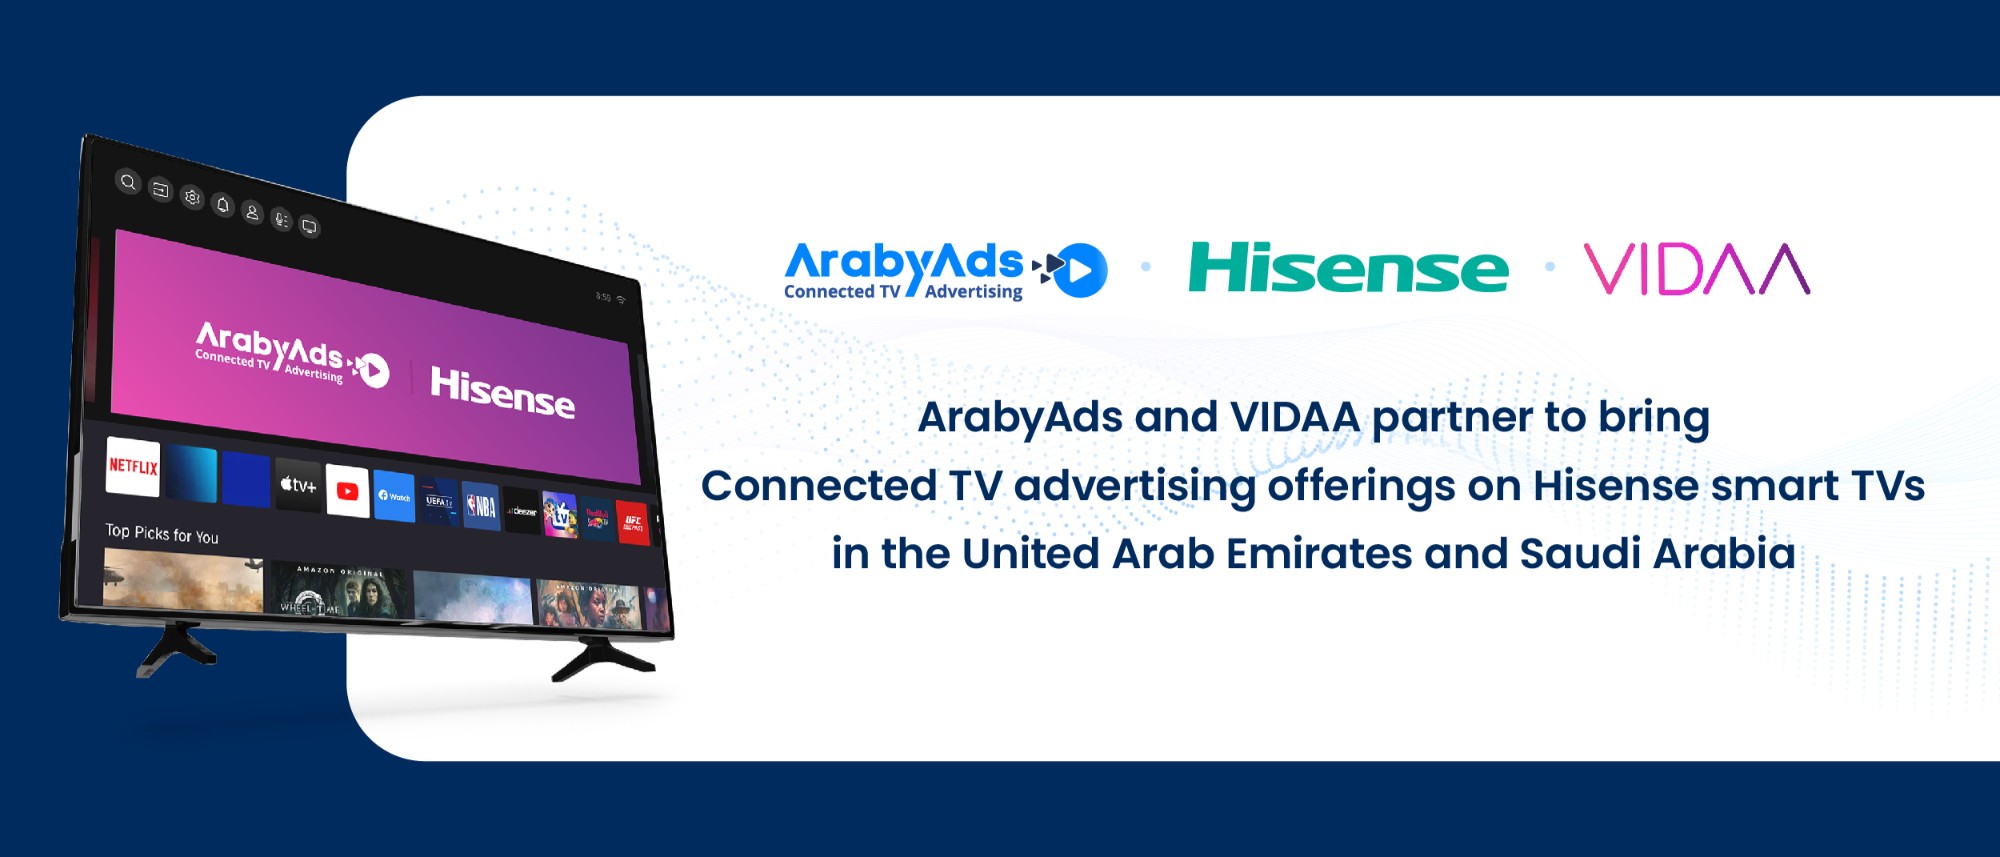 ArabyAds and VIDAA partner to bring Connected TV advertising offerings on Hisense smart TVs in the United Arab Emirates and Saudi Arabia